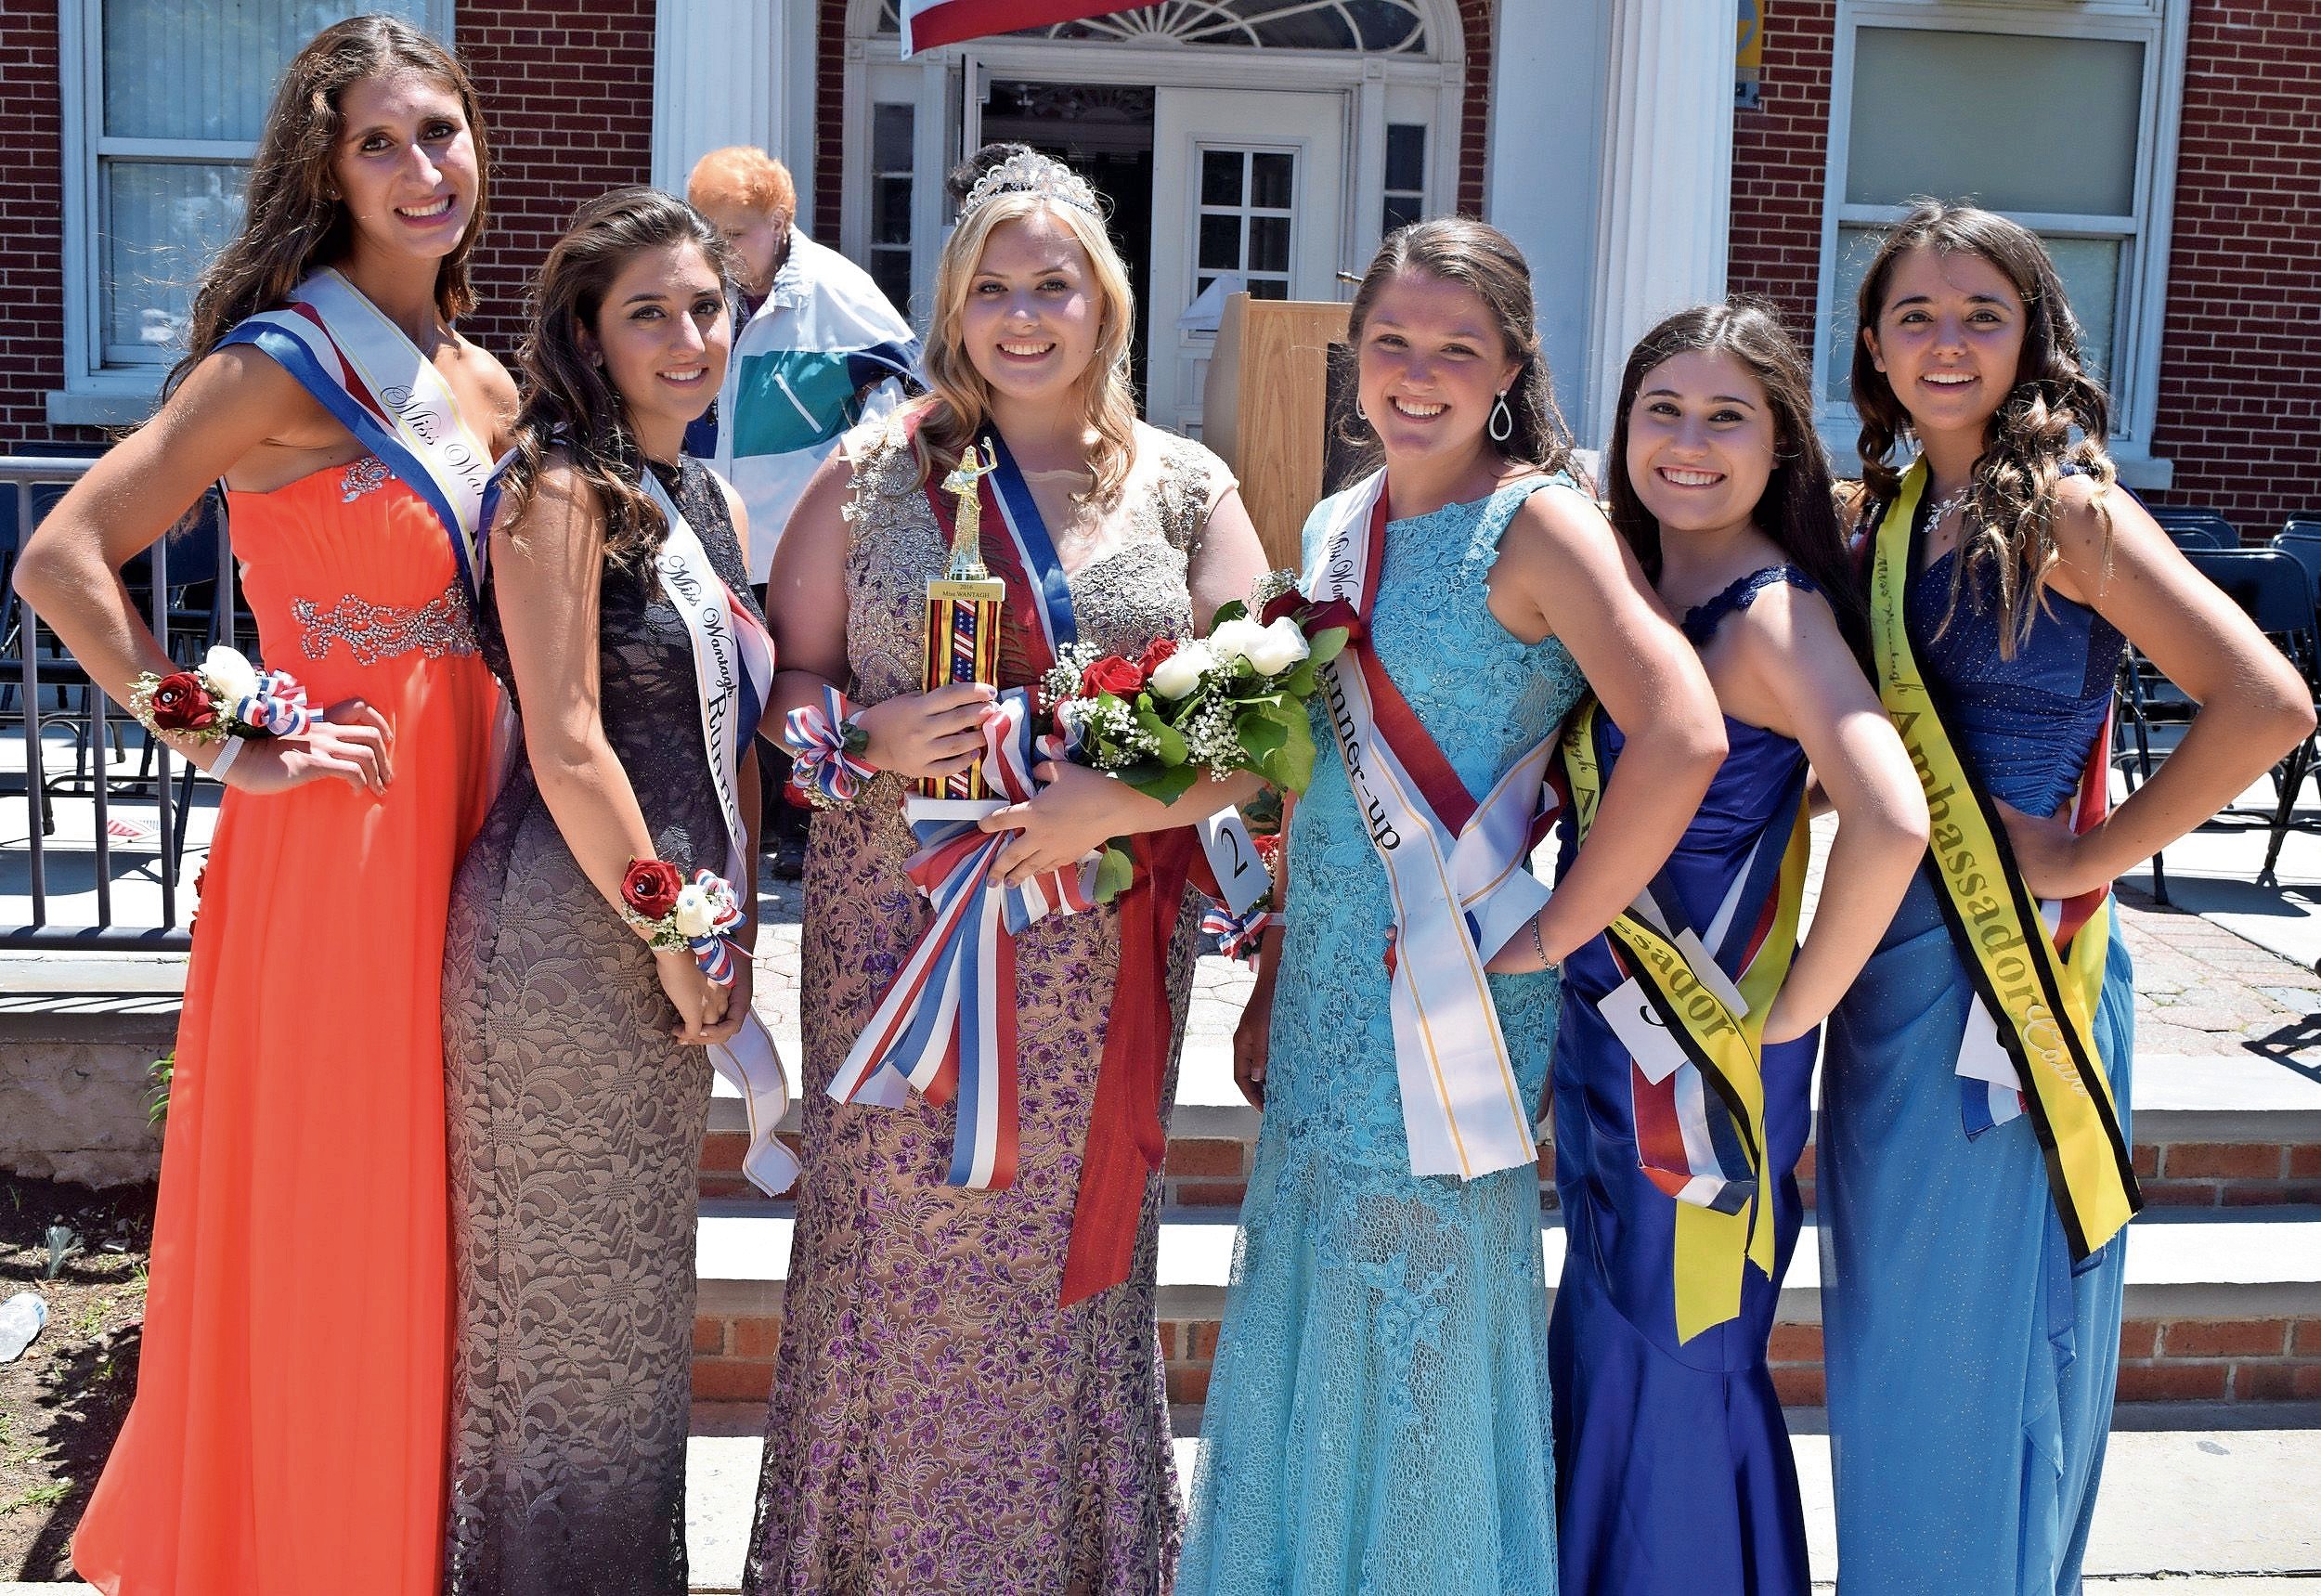 The Miss Wantagh Court will host the third annual Women of Wantagh recognition event later this month.